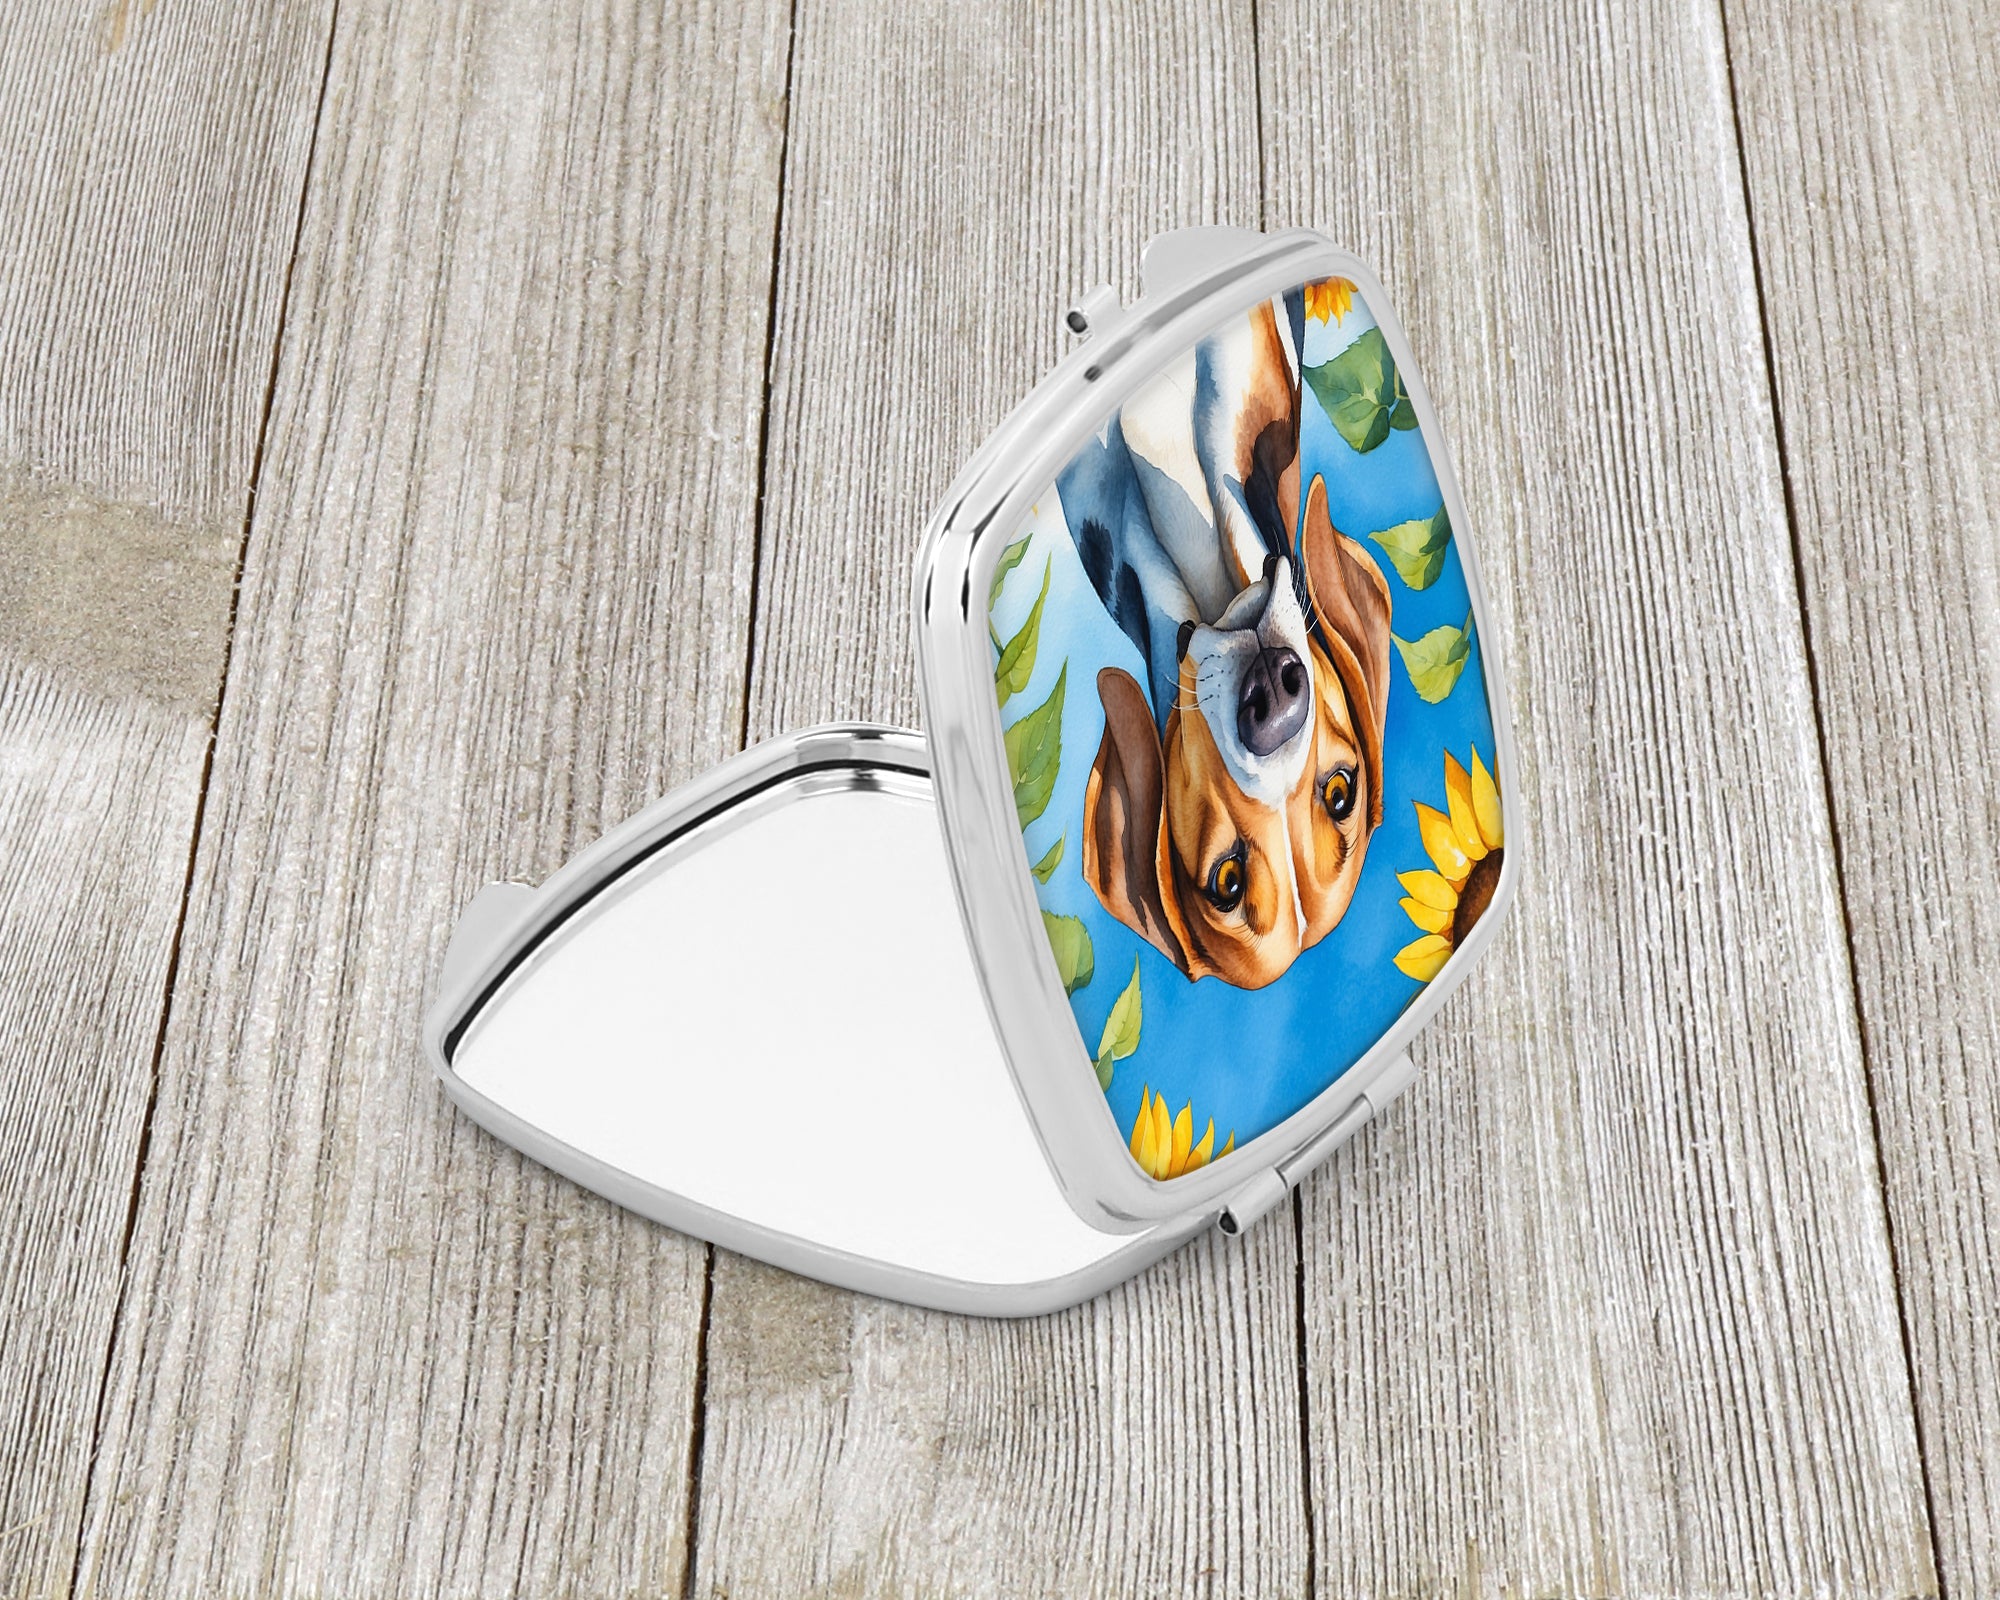 Buy this American Foxhound in Sunflowers Compact Mirror